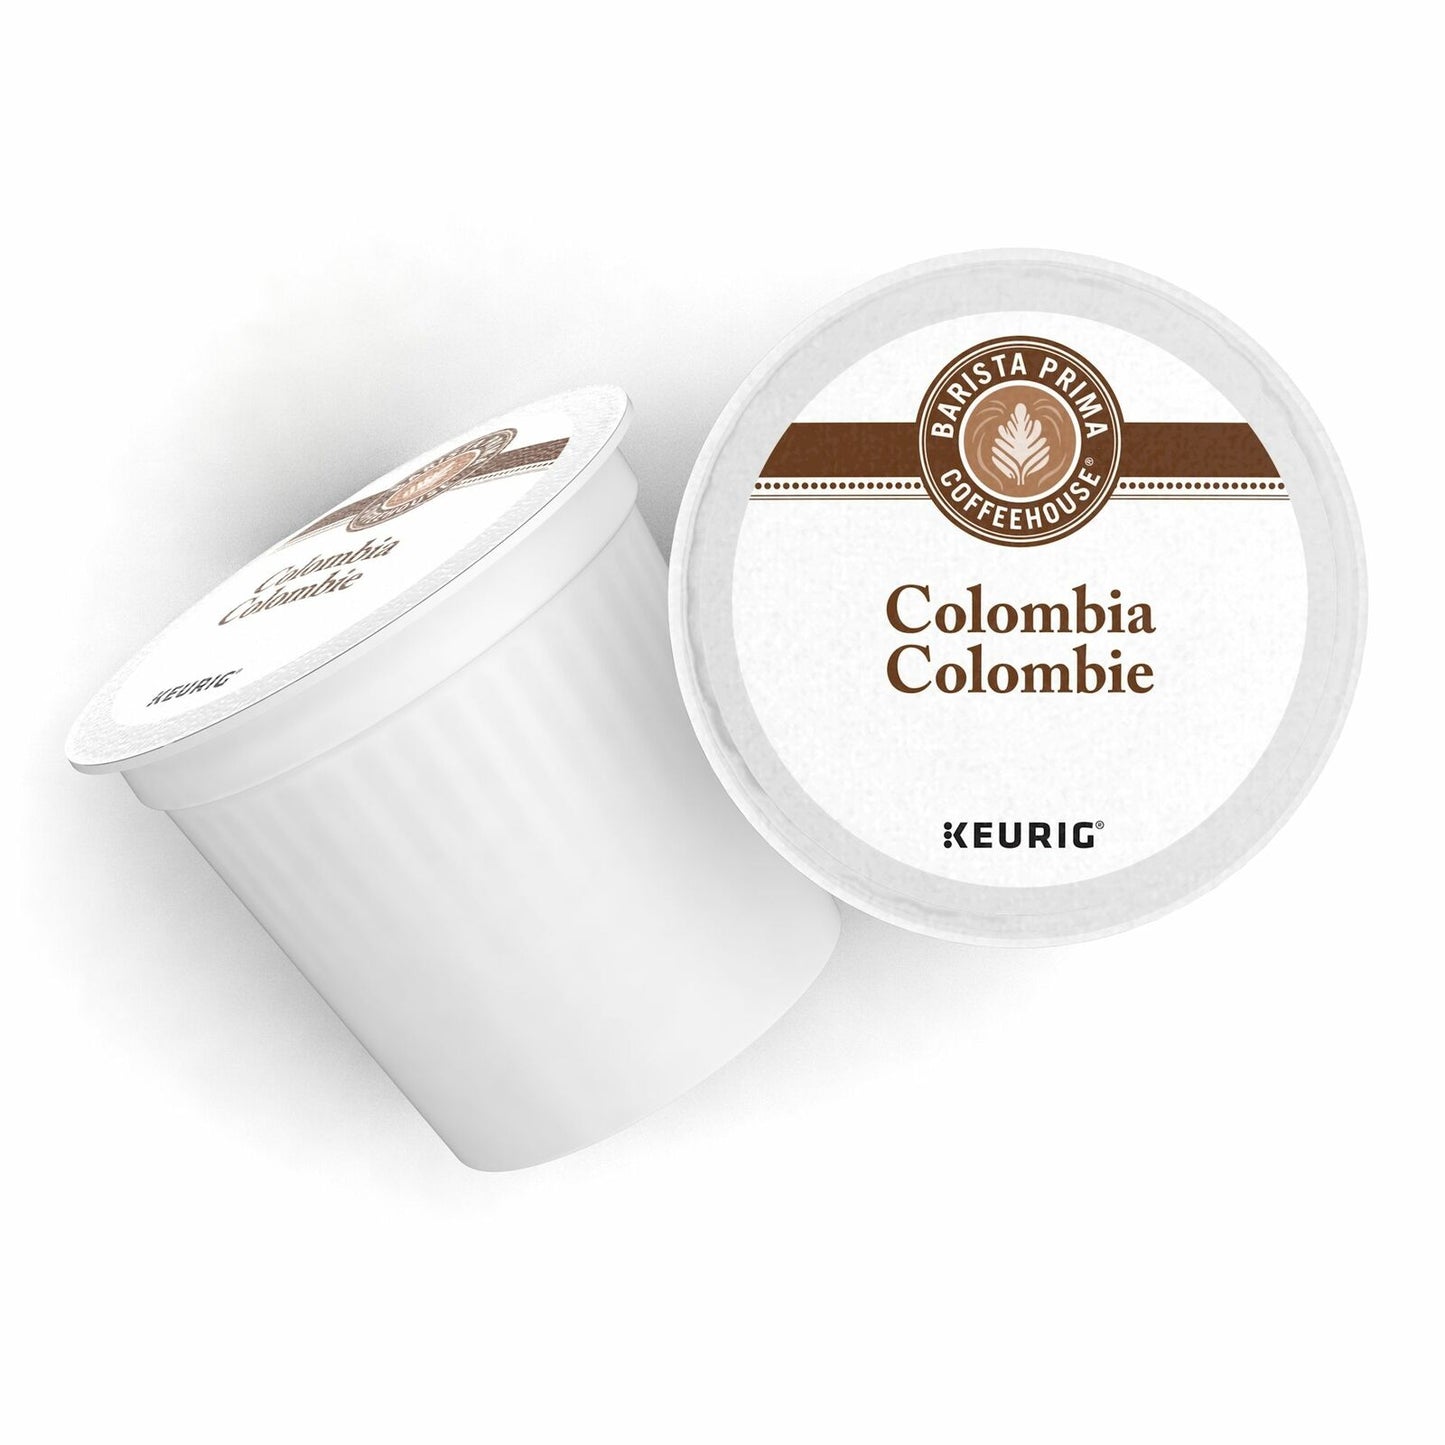 Barista Prima Colombia Coffee Keurig K-Cups, 24 Count (Pack of 4)